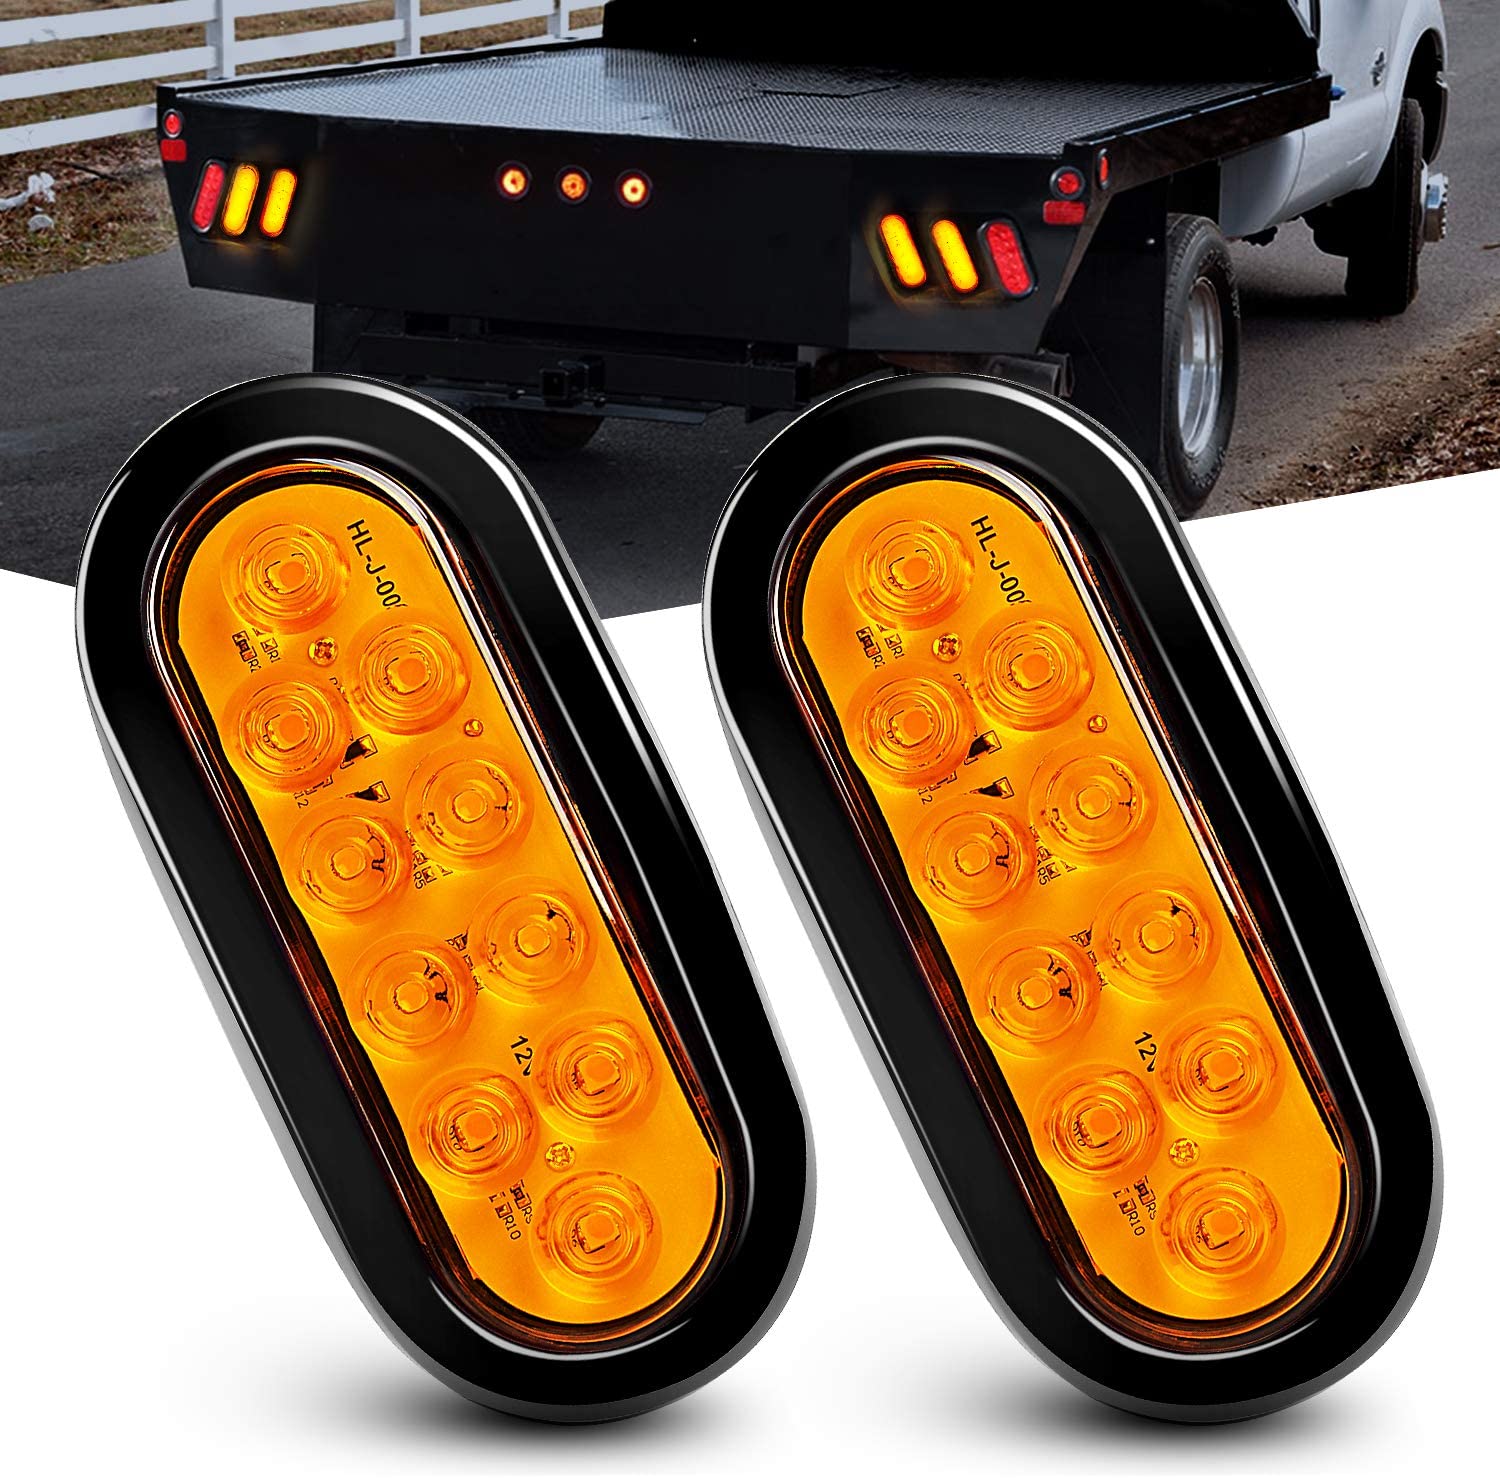 10 Best Tail Lights For Ford F250 - Wonderful Engineering